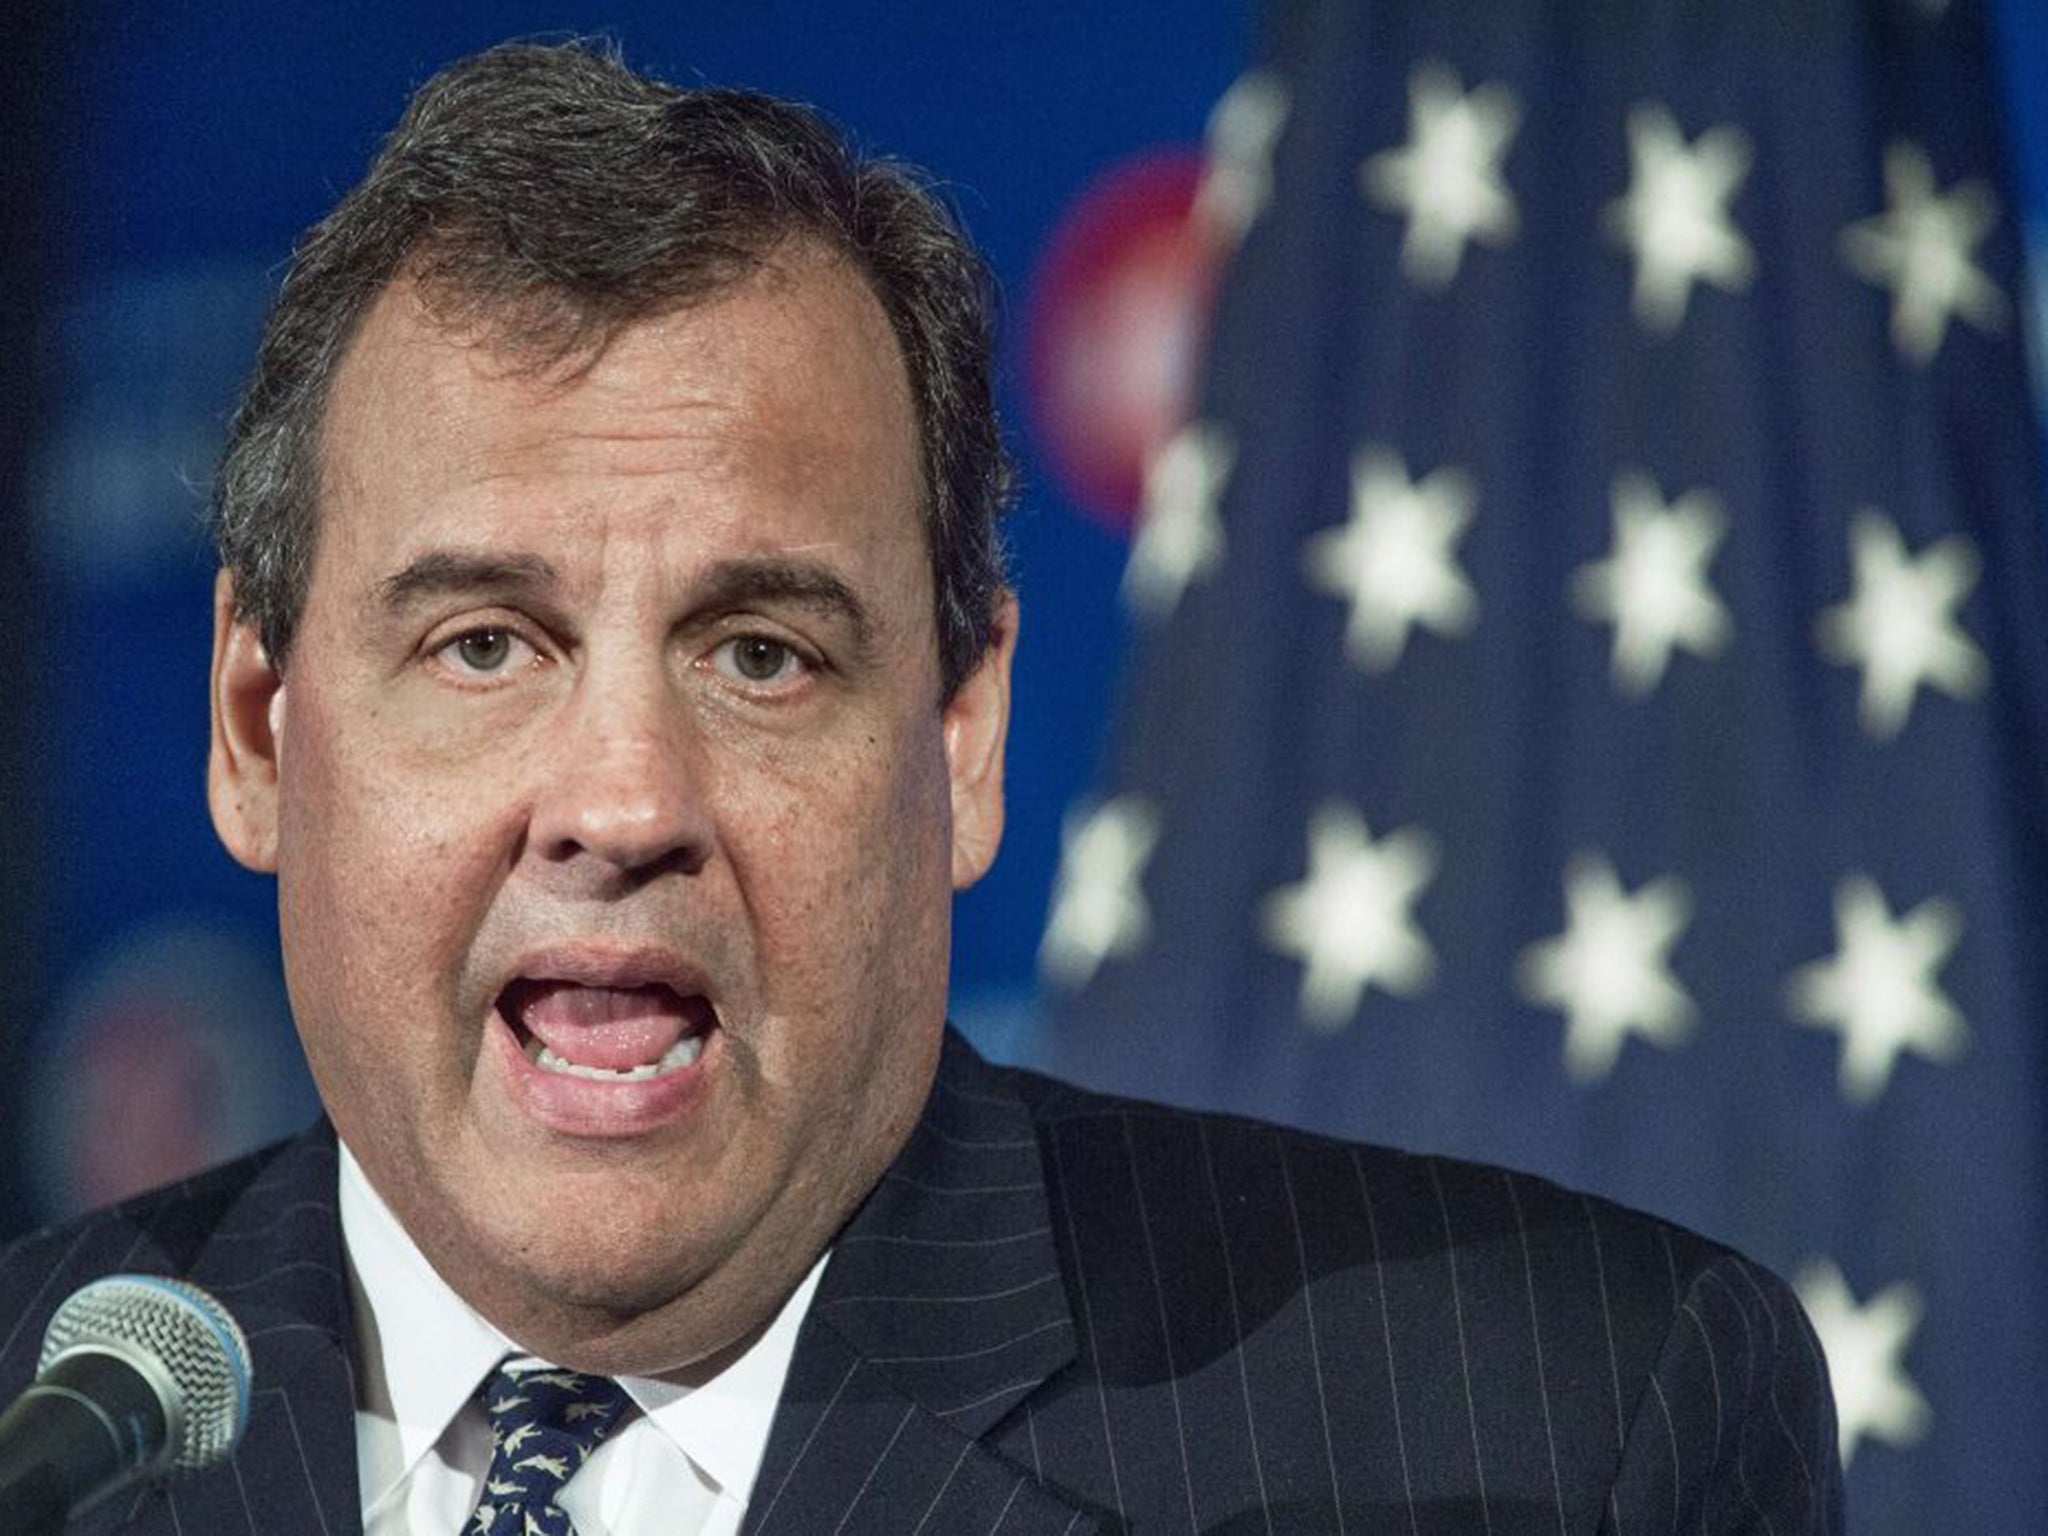 Chris Christie has a reputation for a brusque demeanour when speaking with voters (AFP)